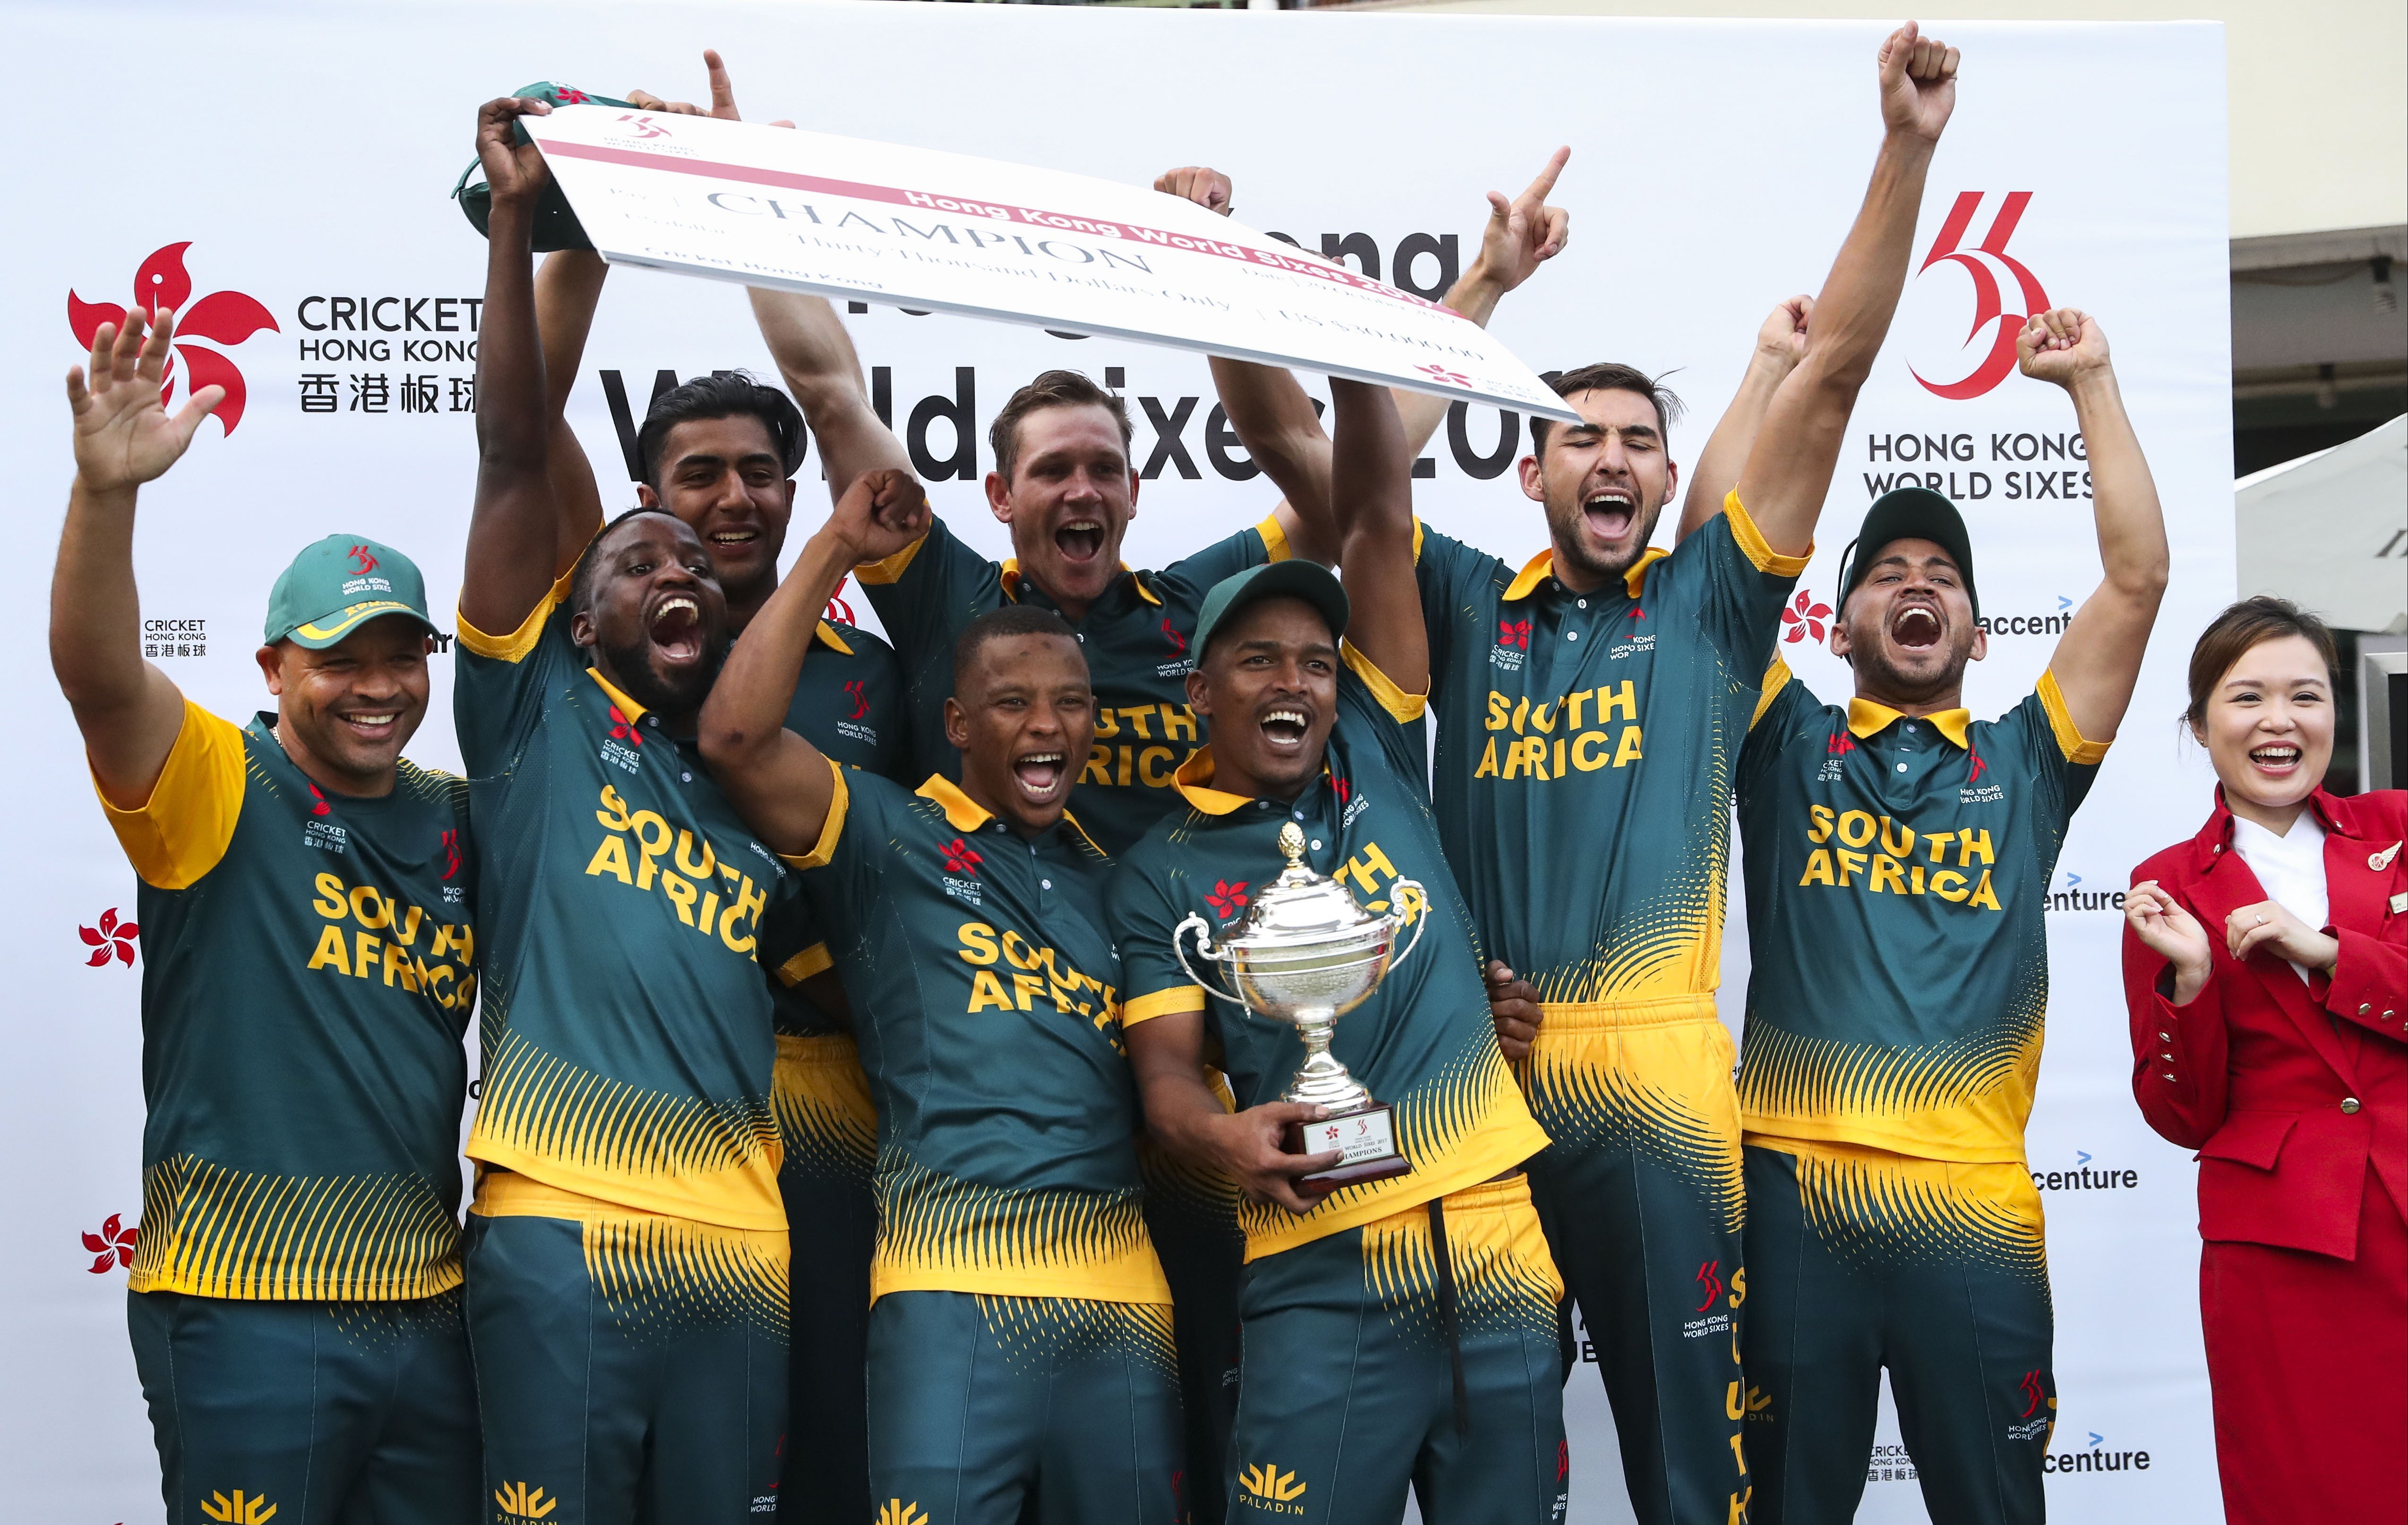 South Africa celebrate winning the Cup at the Hong Kong World Sixes 2017 held at the Kowloon Cricket Club. Photos: K.Y. Cheng